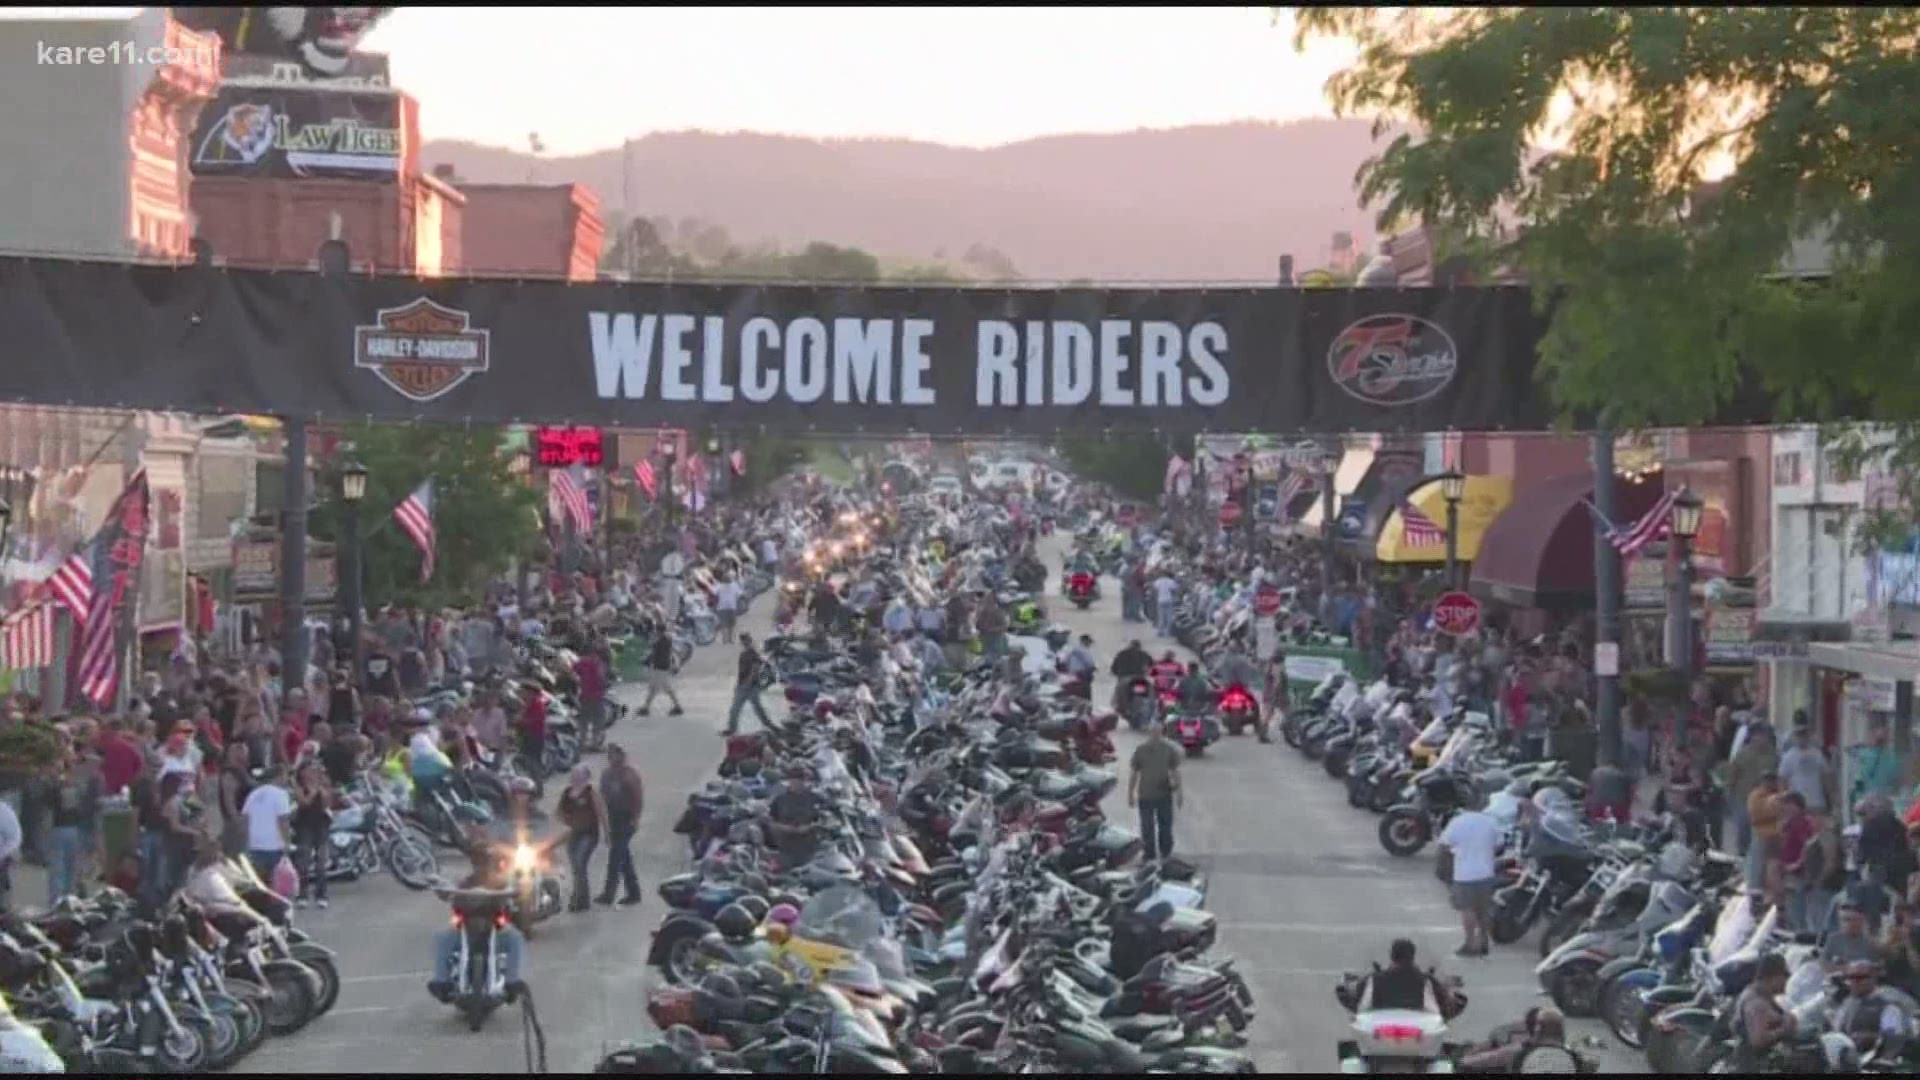 Sturgis Motorcycle Rally 2020 resulted in widespread COVID cases. www.kare1...